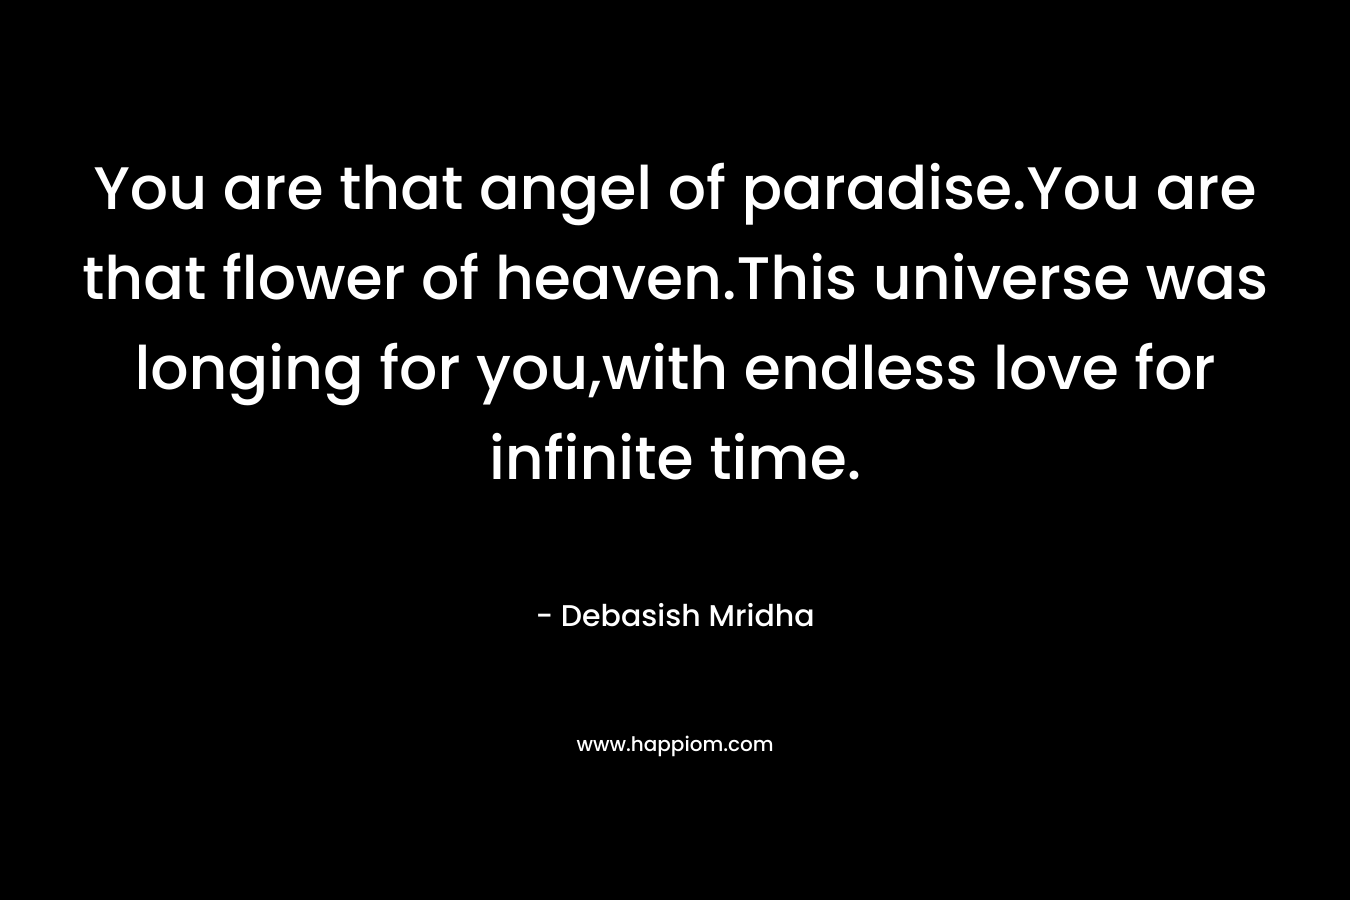 You are that angel of paradise.You are that flower of heaven.This universe was longing for you,with endless love for infinite time.